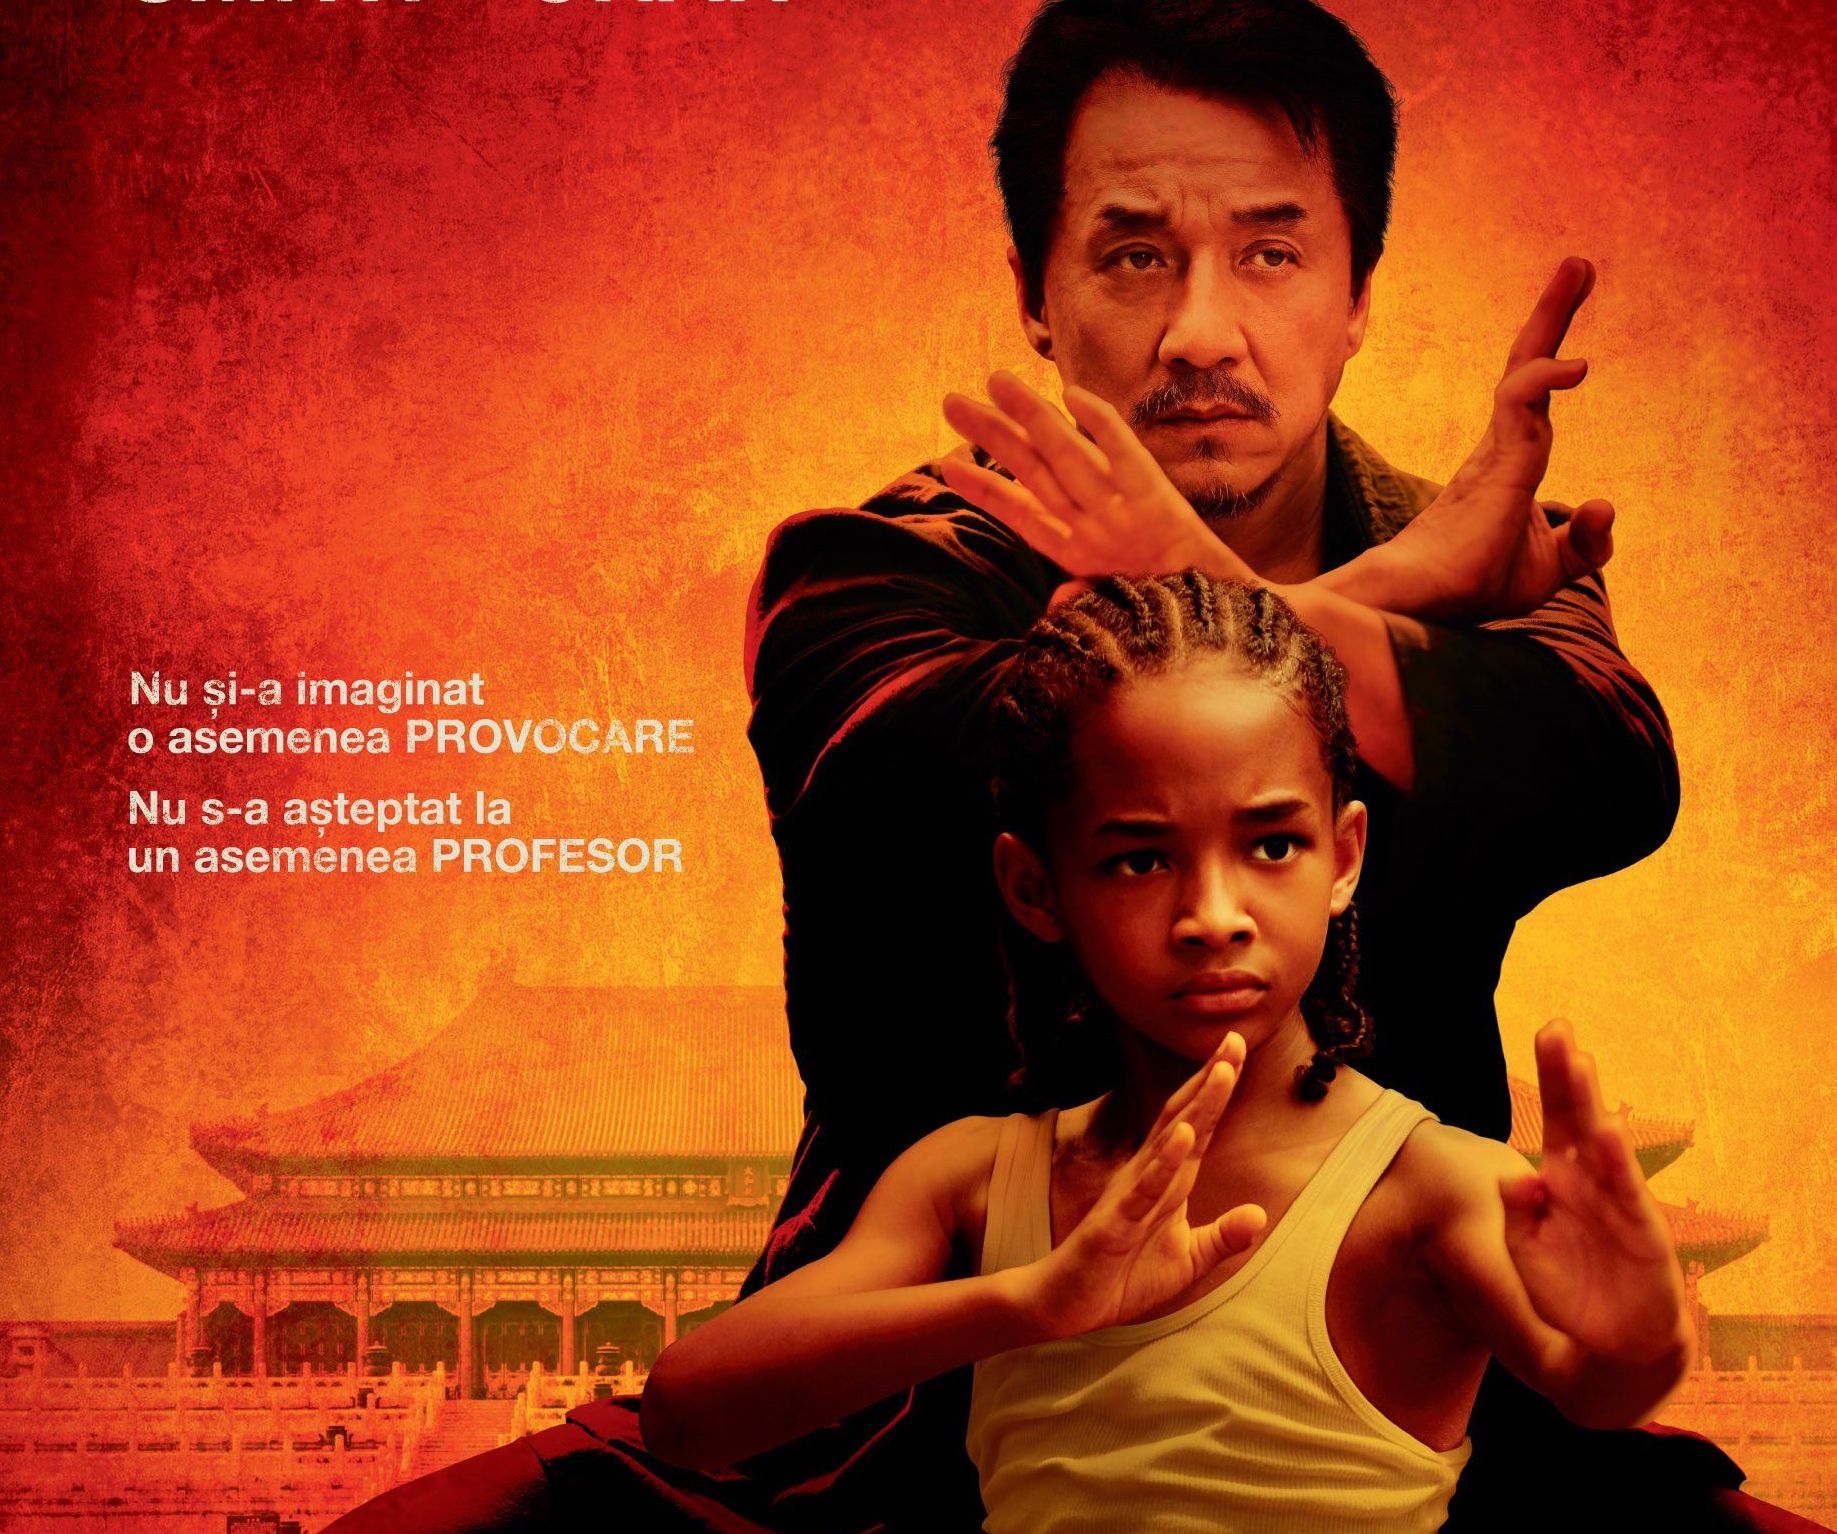 Jackie Chan wins praise for role in Karate Kid